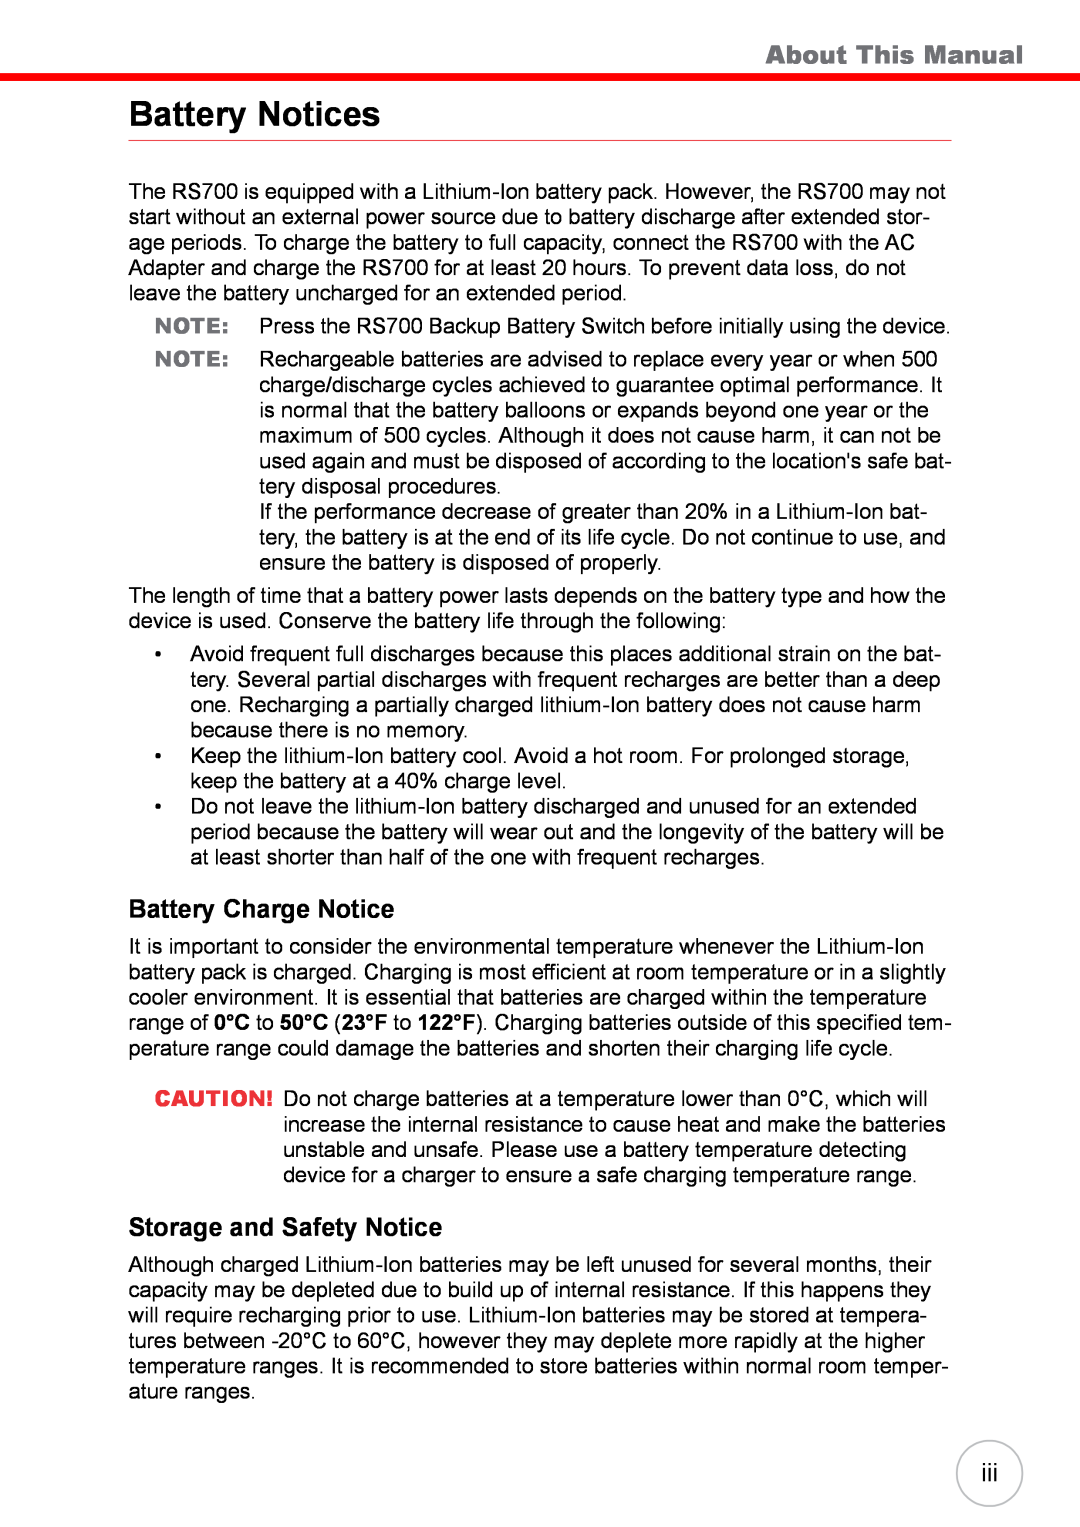 Unitech RS700 user manual Battery Notices, About This Manual, Battery Charge Notice, Storage and Safety Notice 